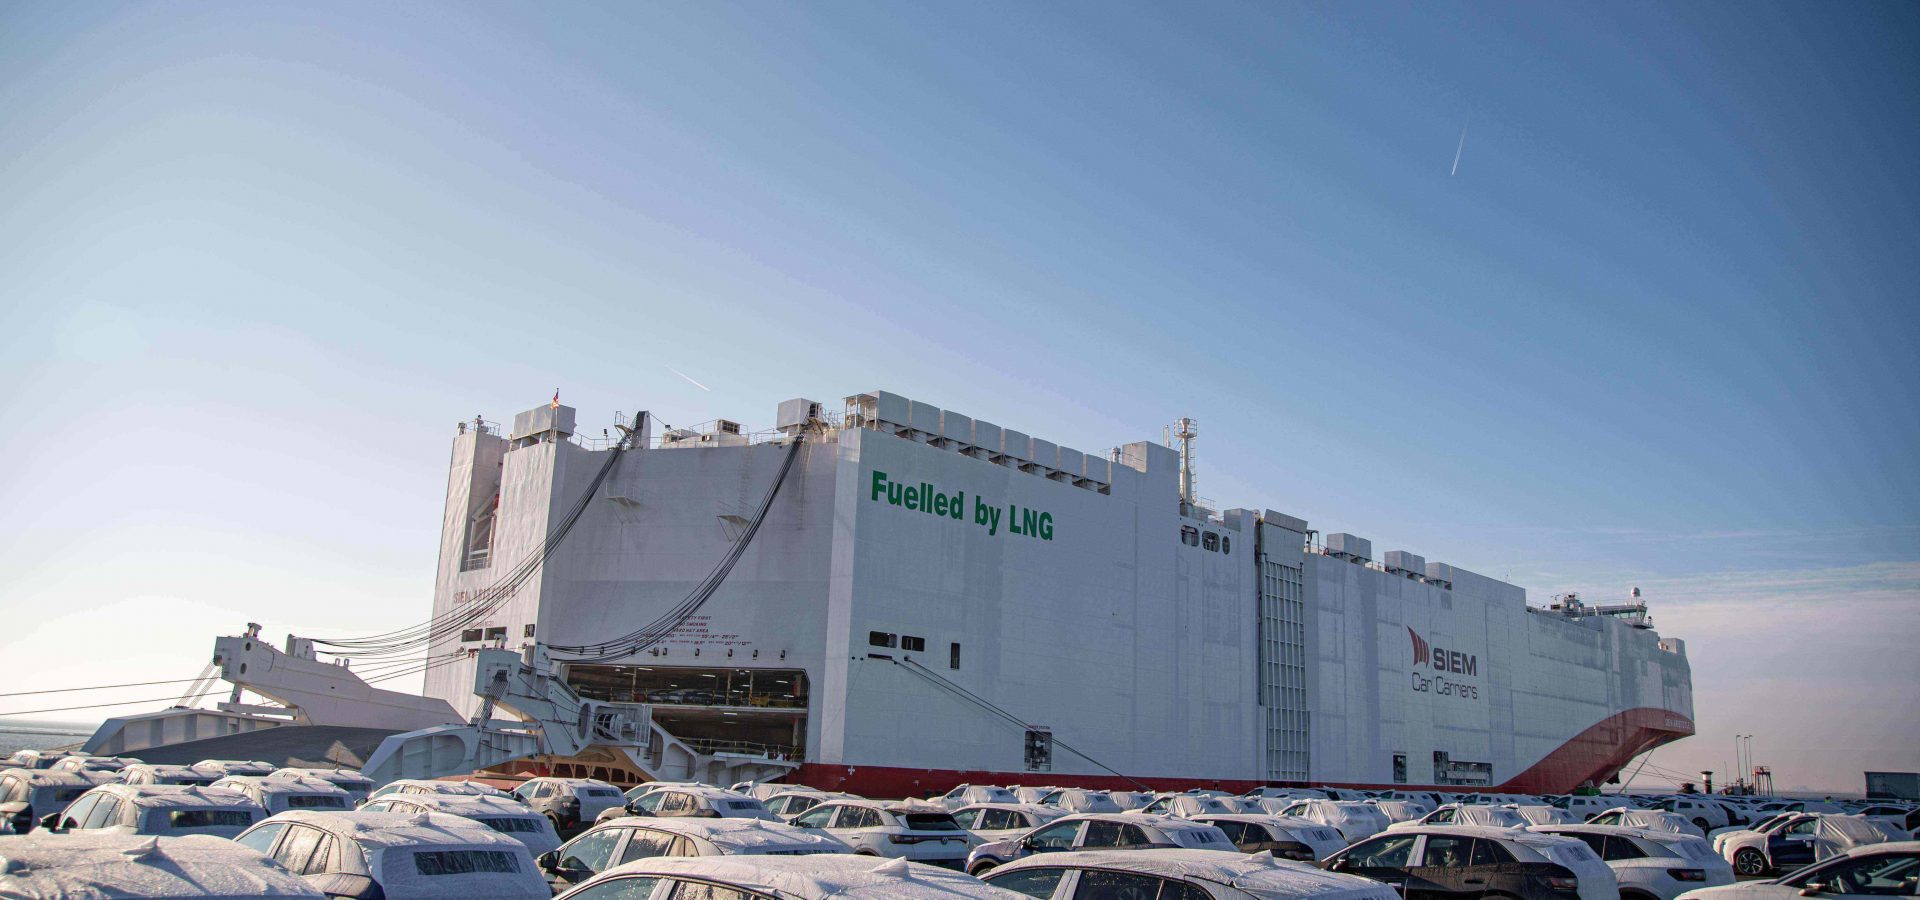 Siem Car Carriers’ Second LNG Ship on Maiden Voyage for Volkswagen